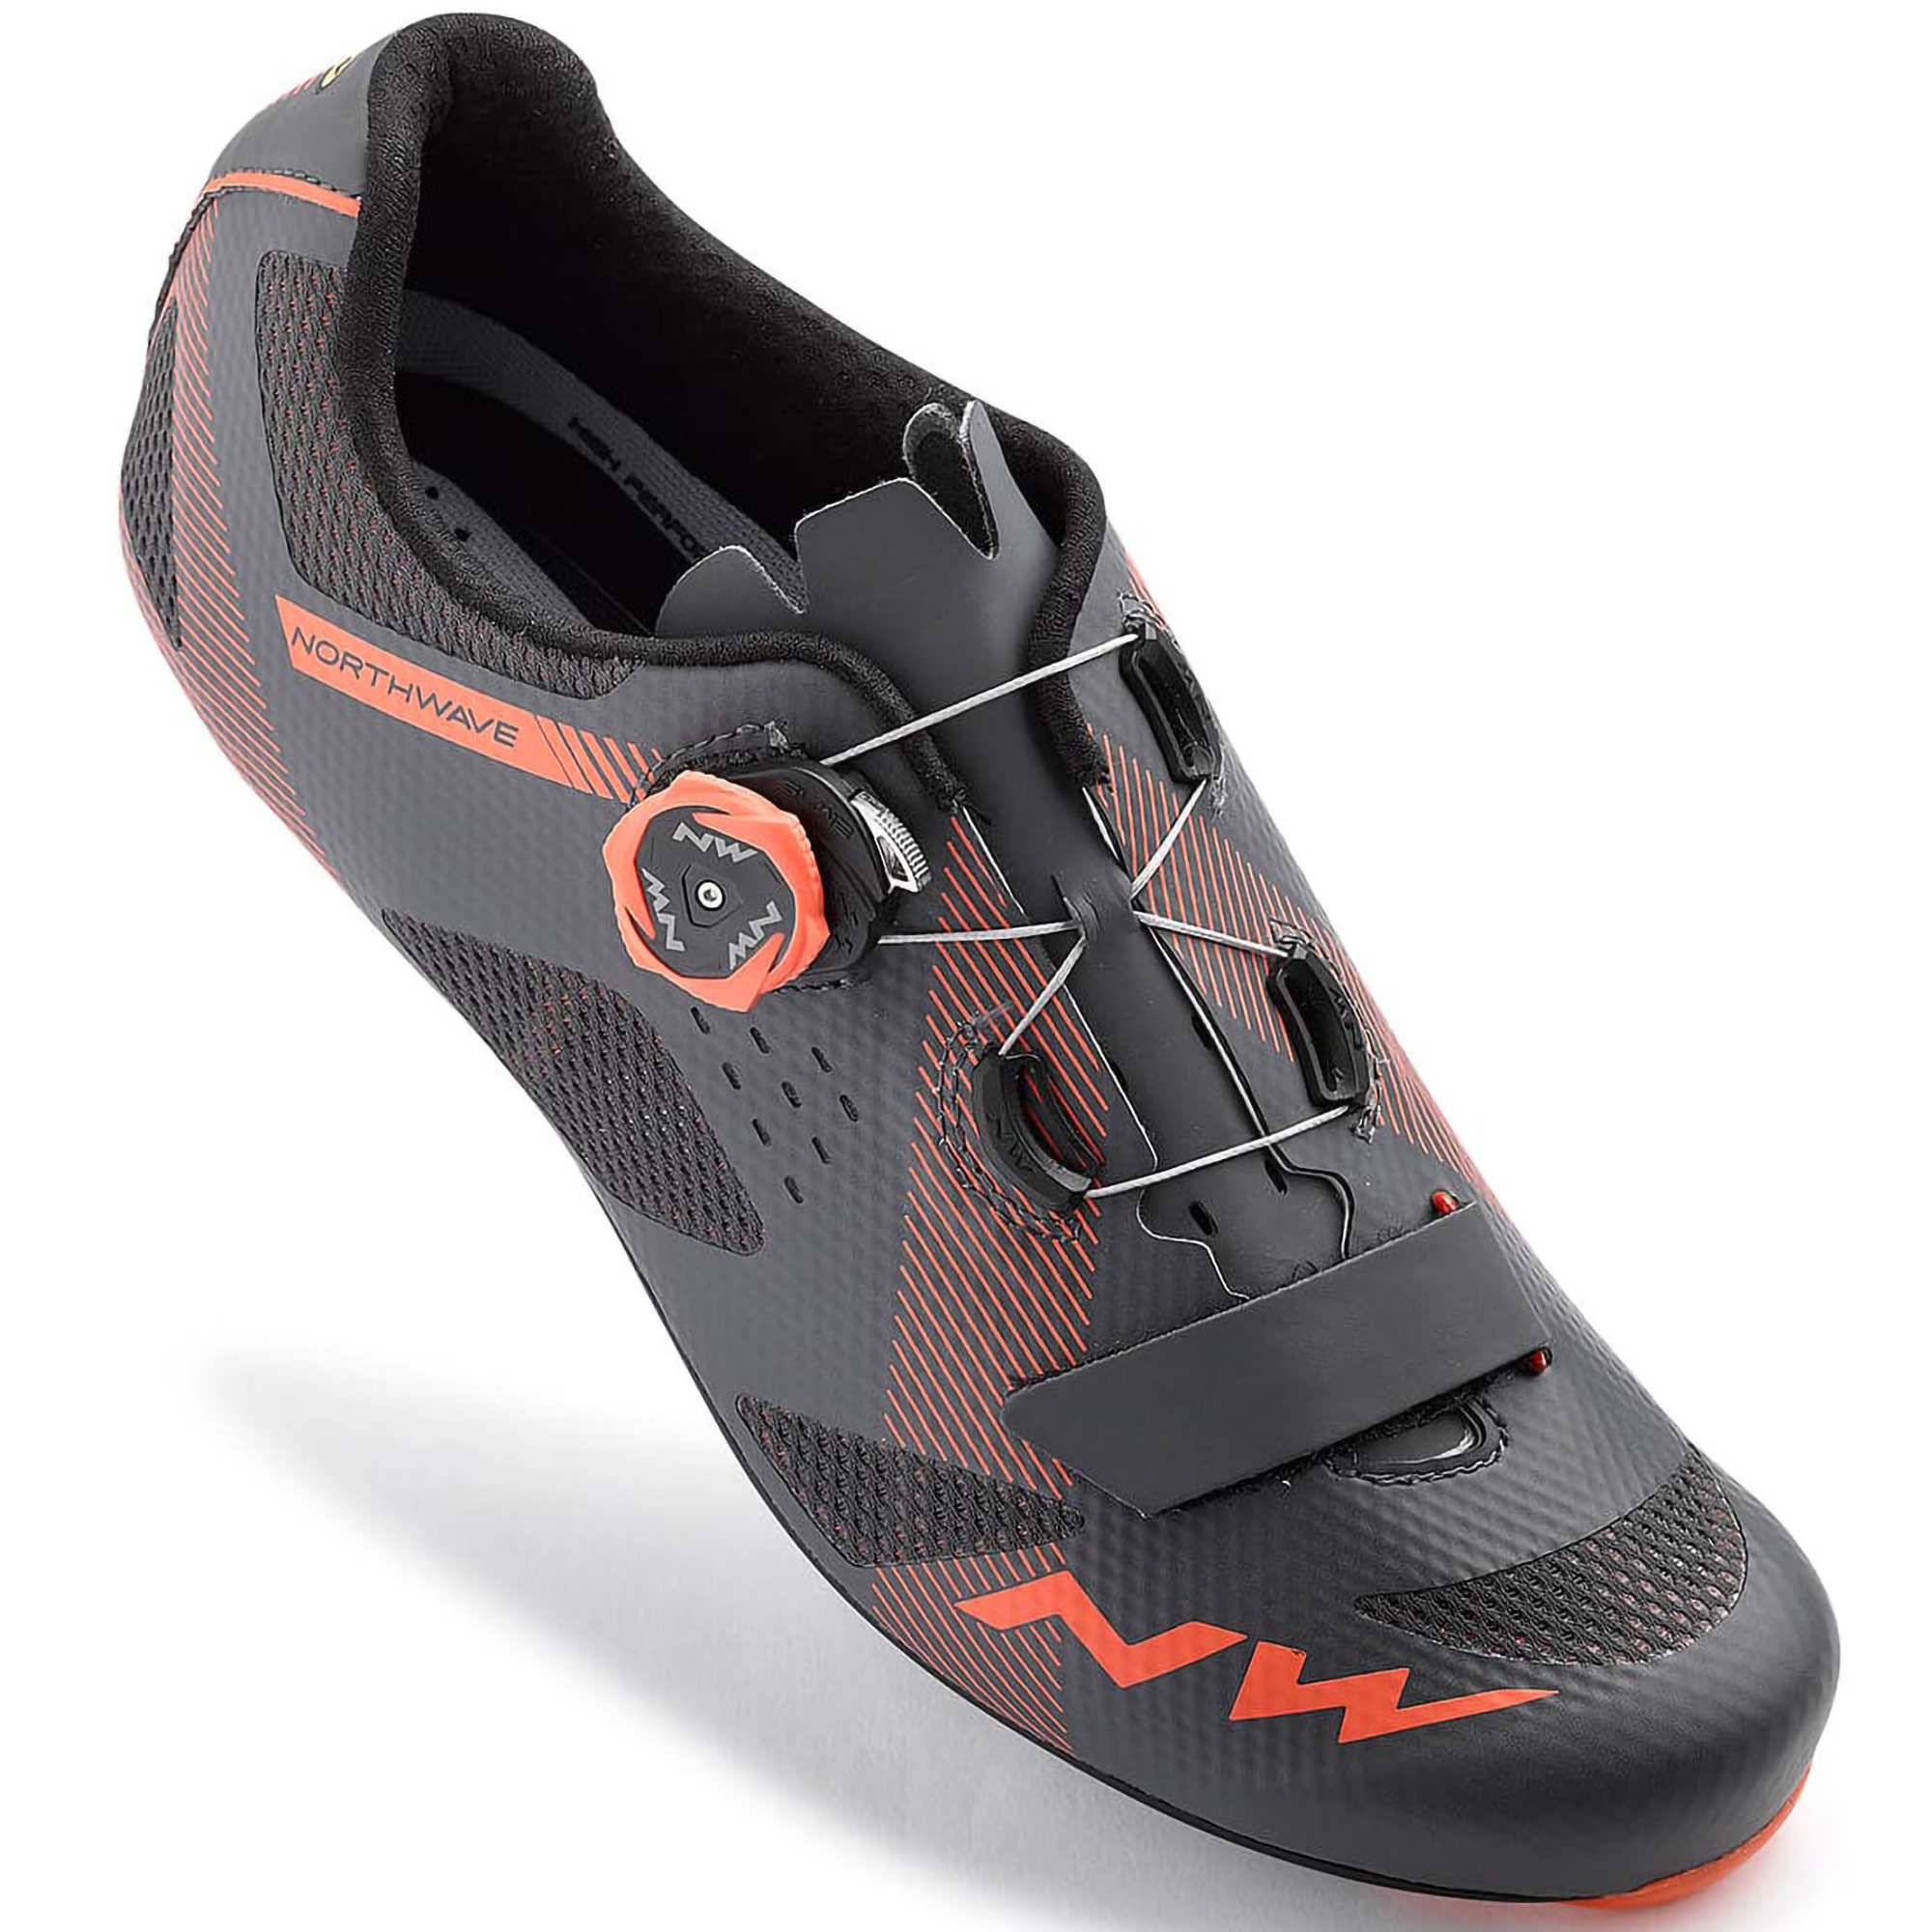 Northwave Storm Road Cycling Bike Shoes eBay